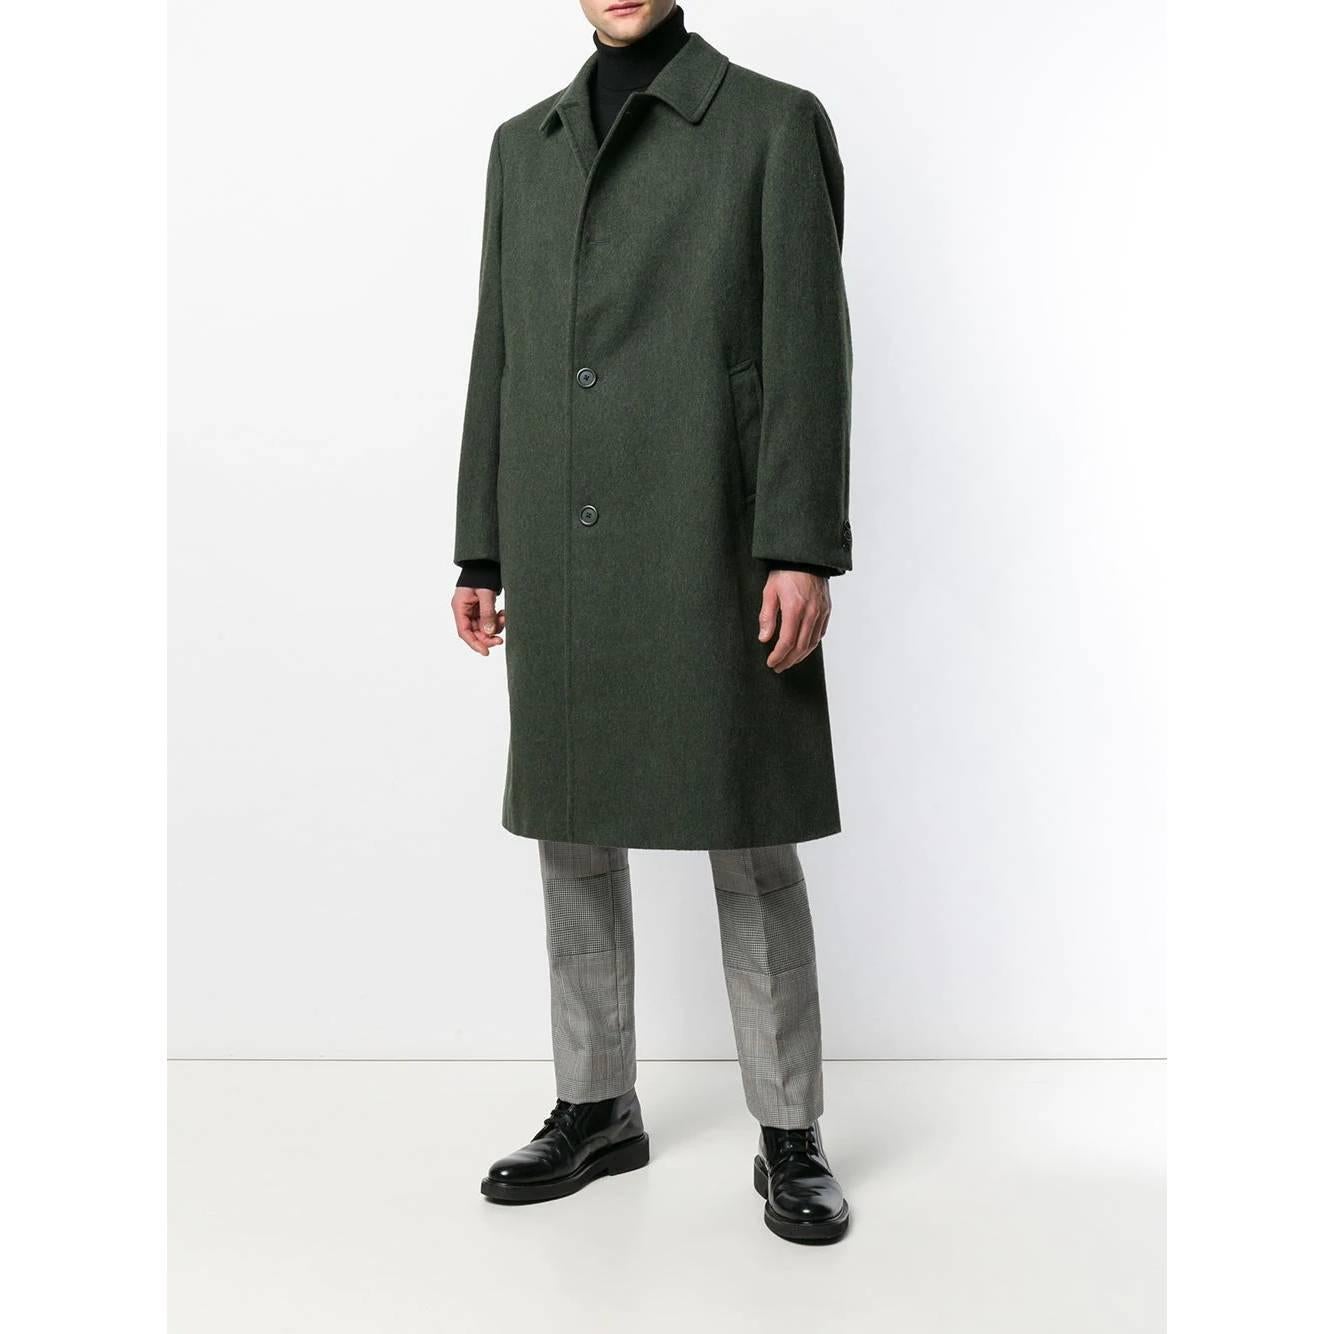 A.N.G.E.L.O. Vintage - ITALY
Aquascutum coat in green virgin wool. Classic collar, front button closure, two welt pockets and back vent. Lined interior.

Years: 70s

Made in UK

Size: M

Flat measurements
Height: 113 cm
Bust: 49 cm
Shoulder: 42